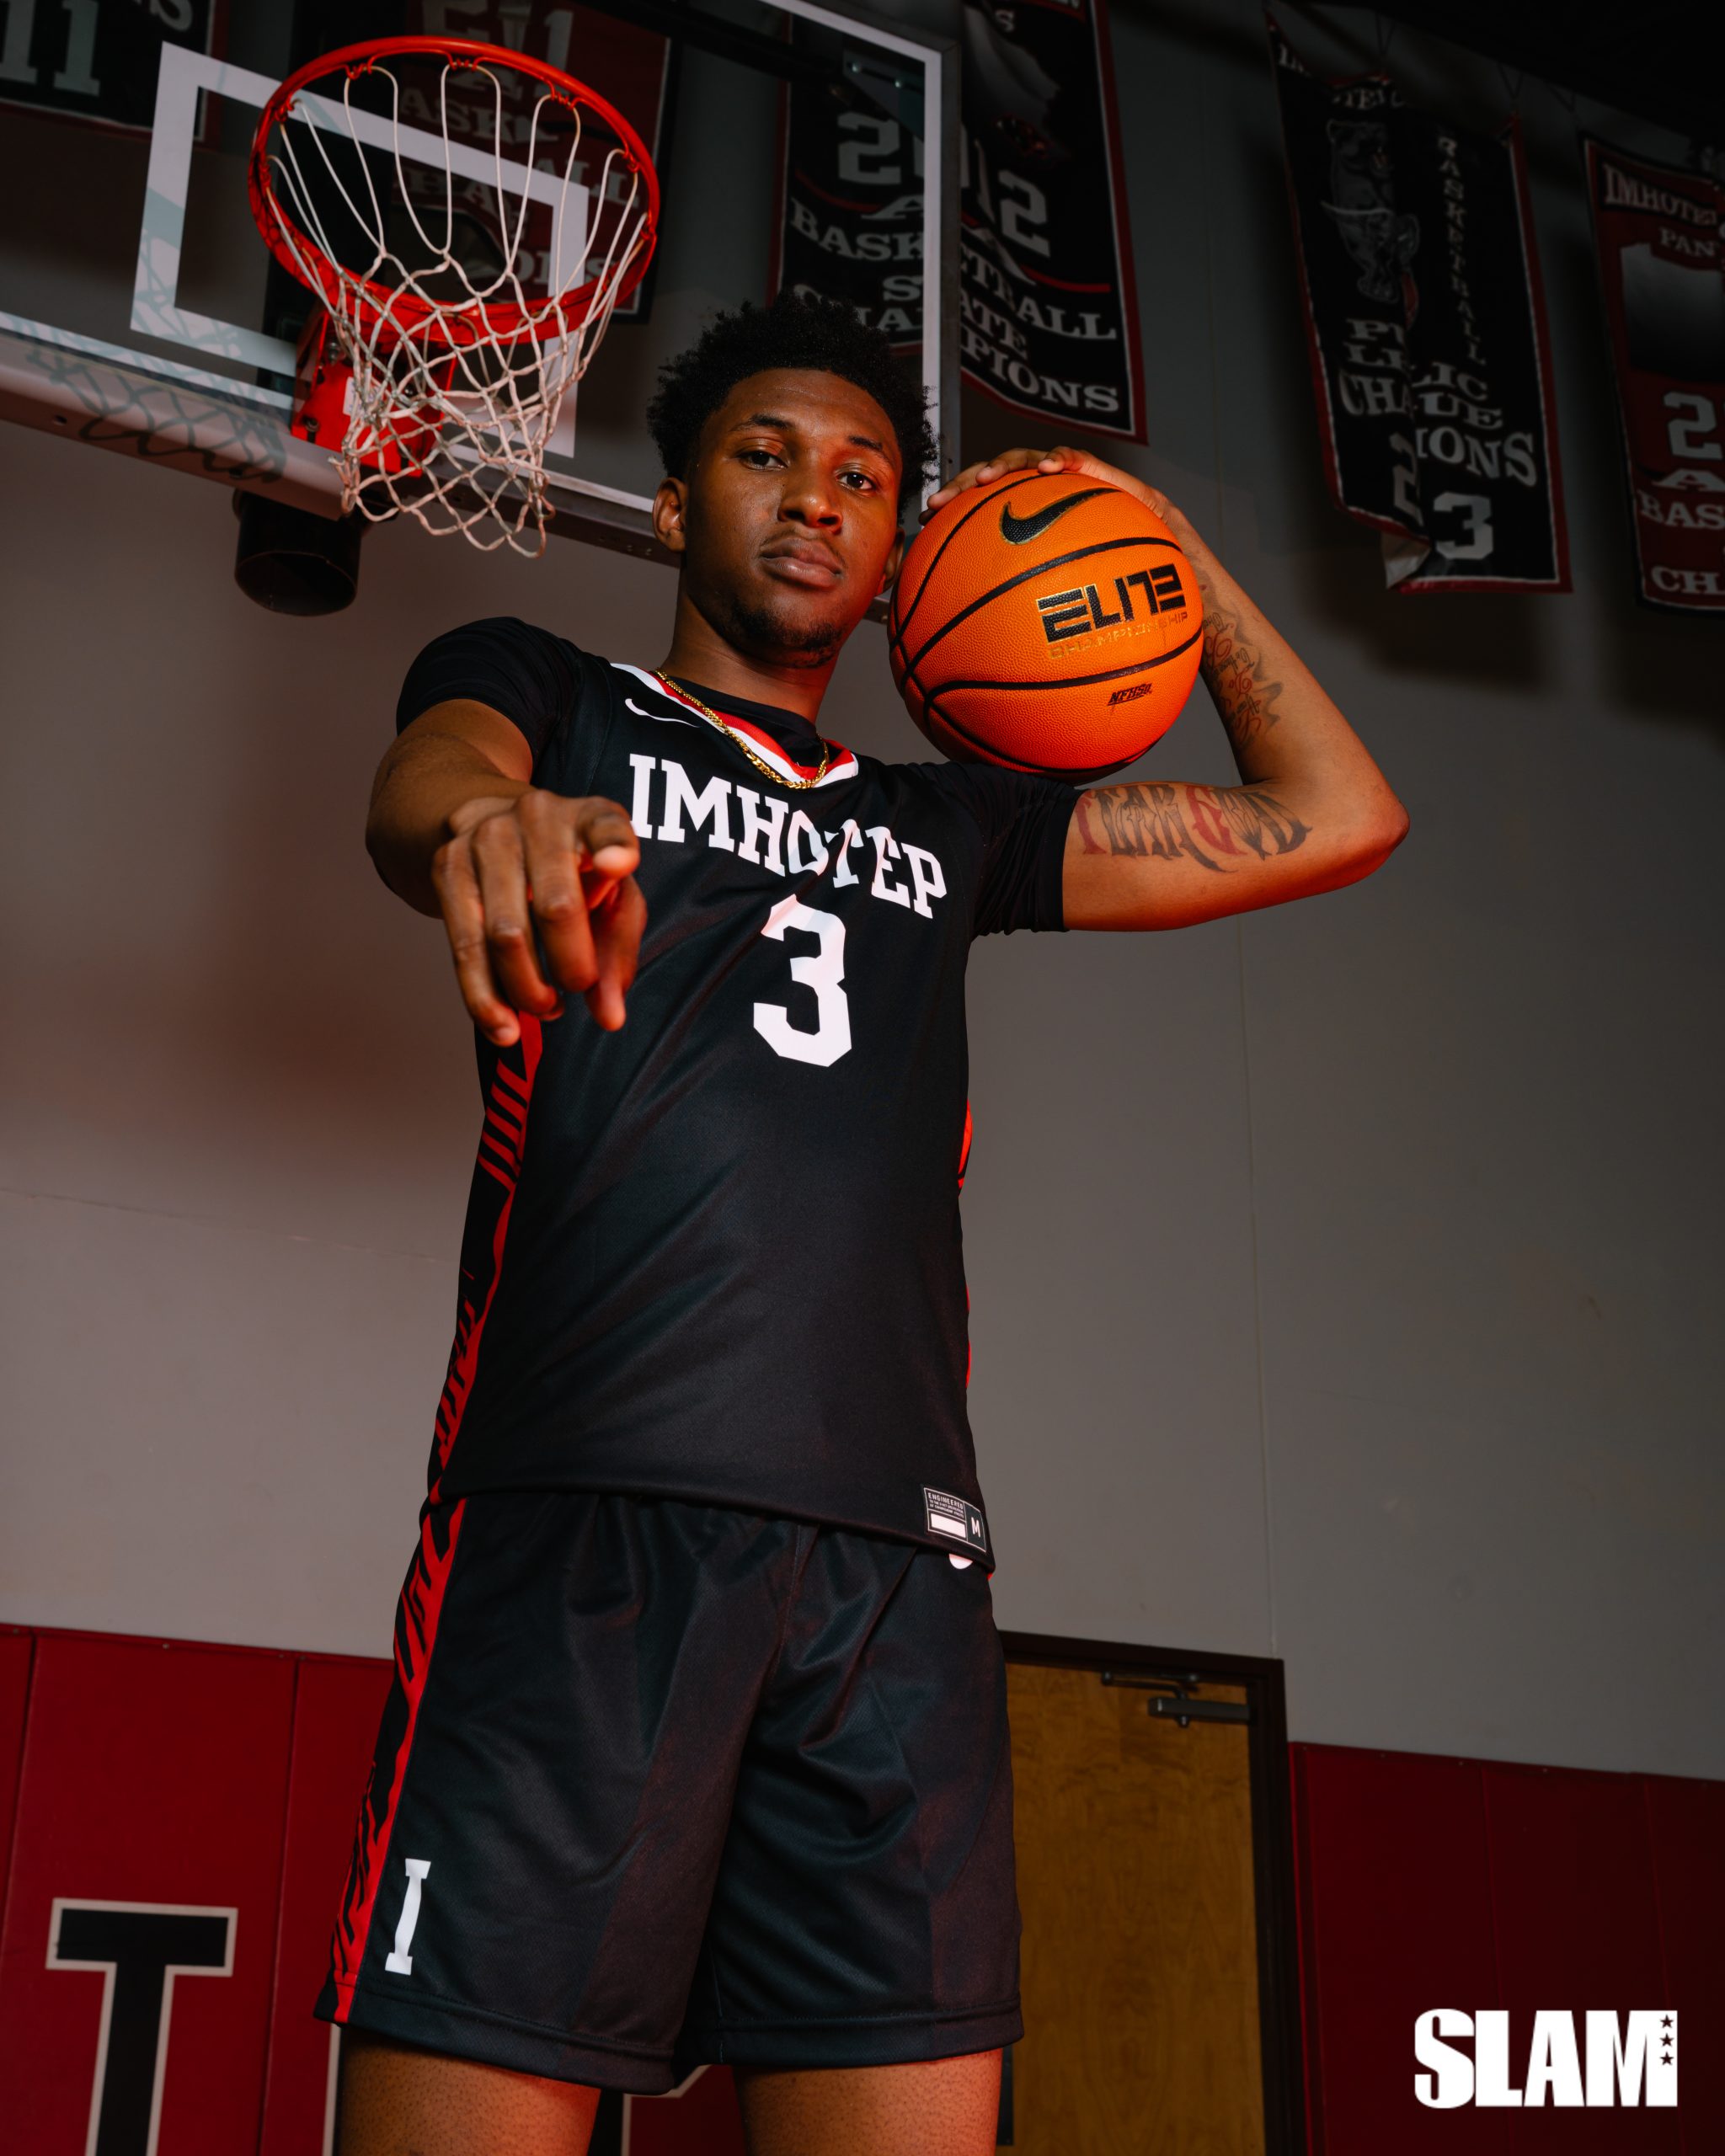 Kentucky Commit Justin Edwards is Ready to Put on for Philly at Imhotep Institute